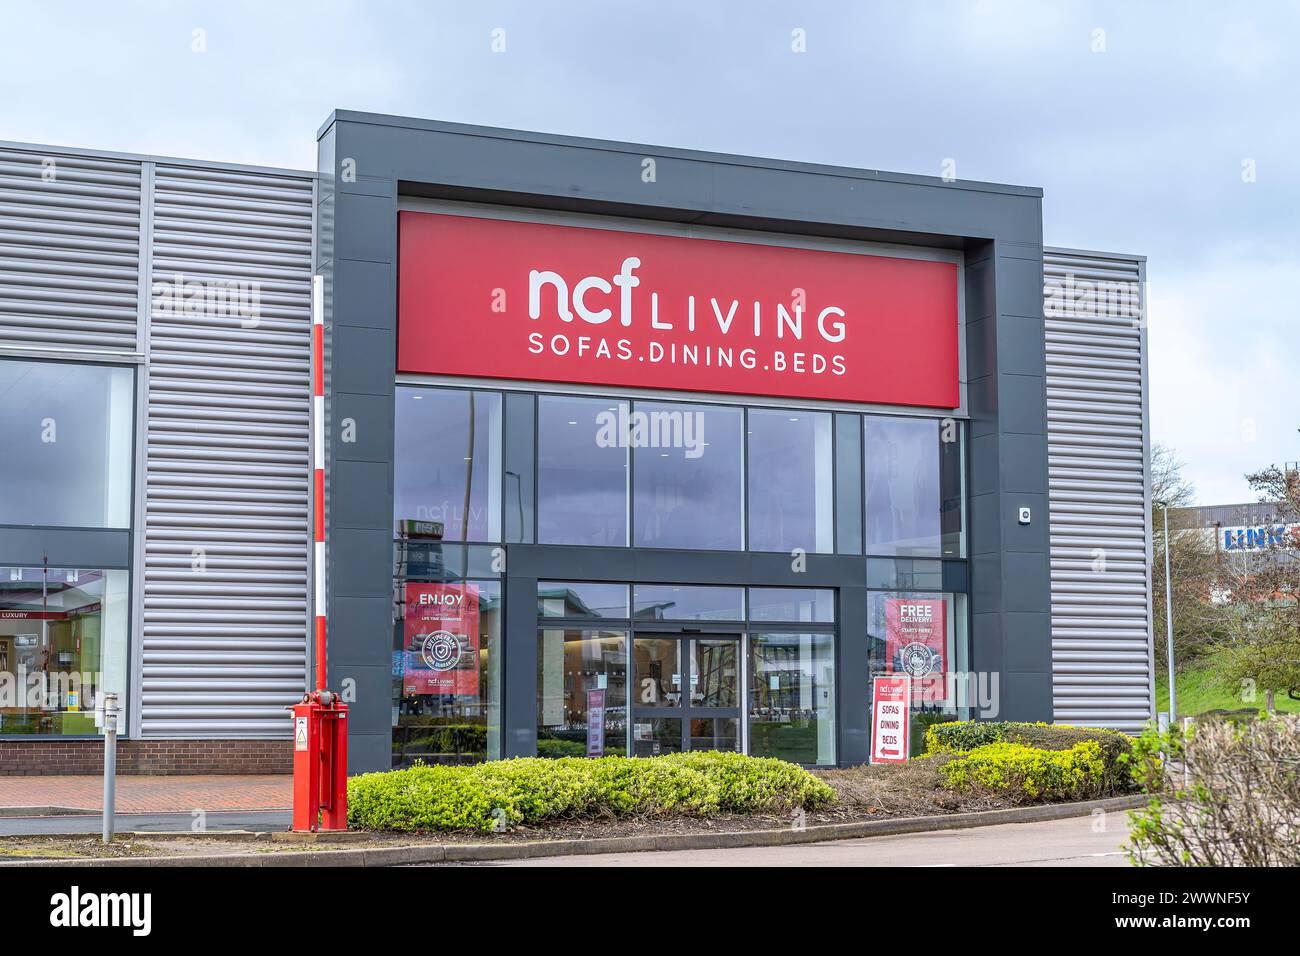 NCF Living. Sofas, Dining, beds shop. Stock Photo